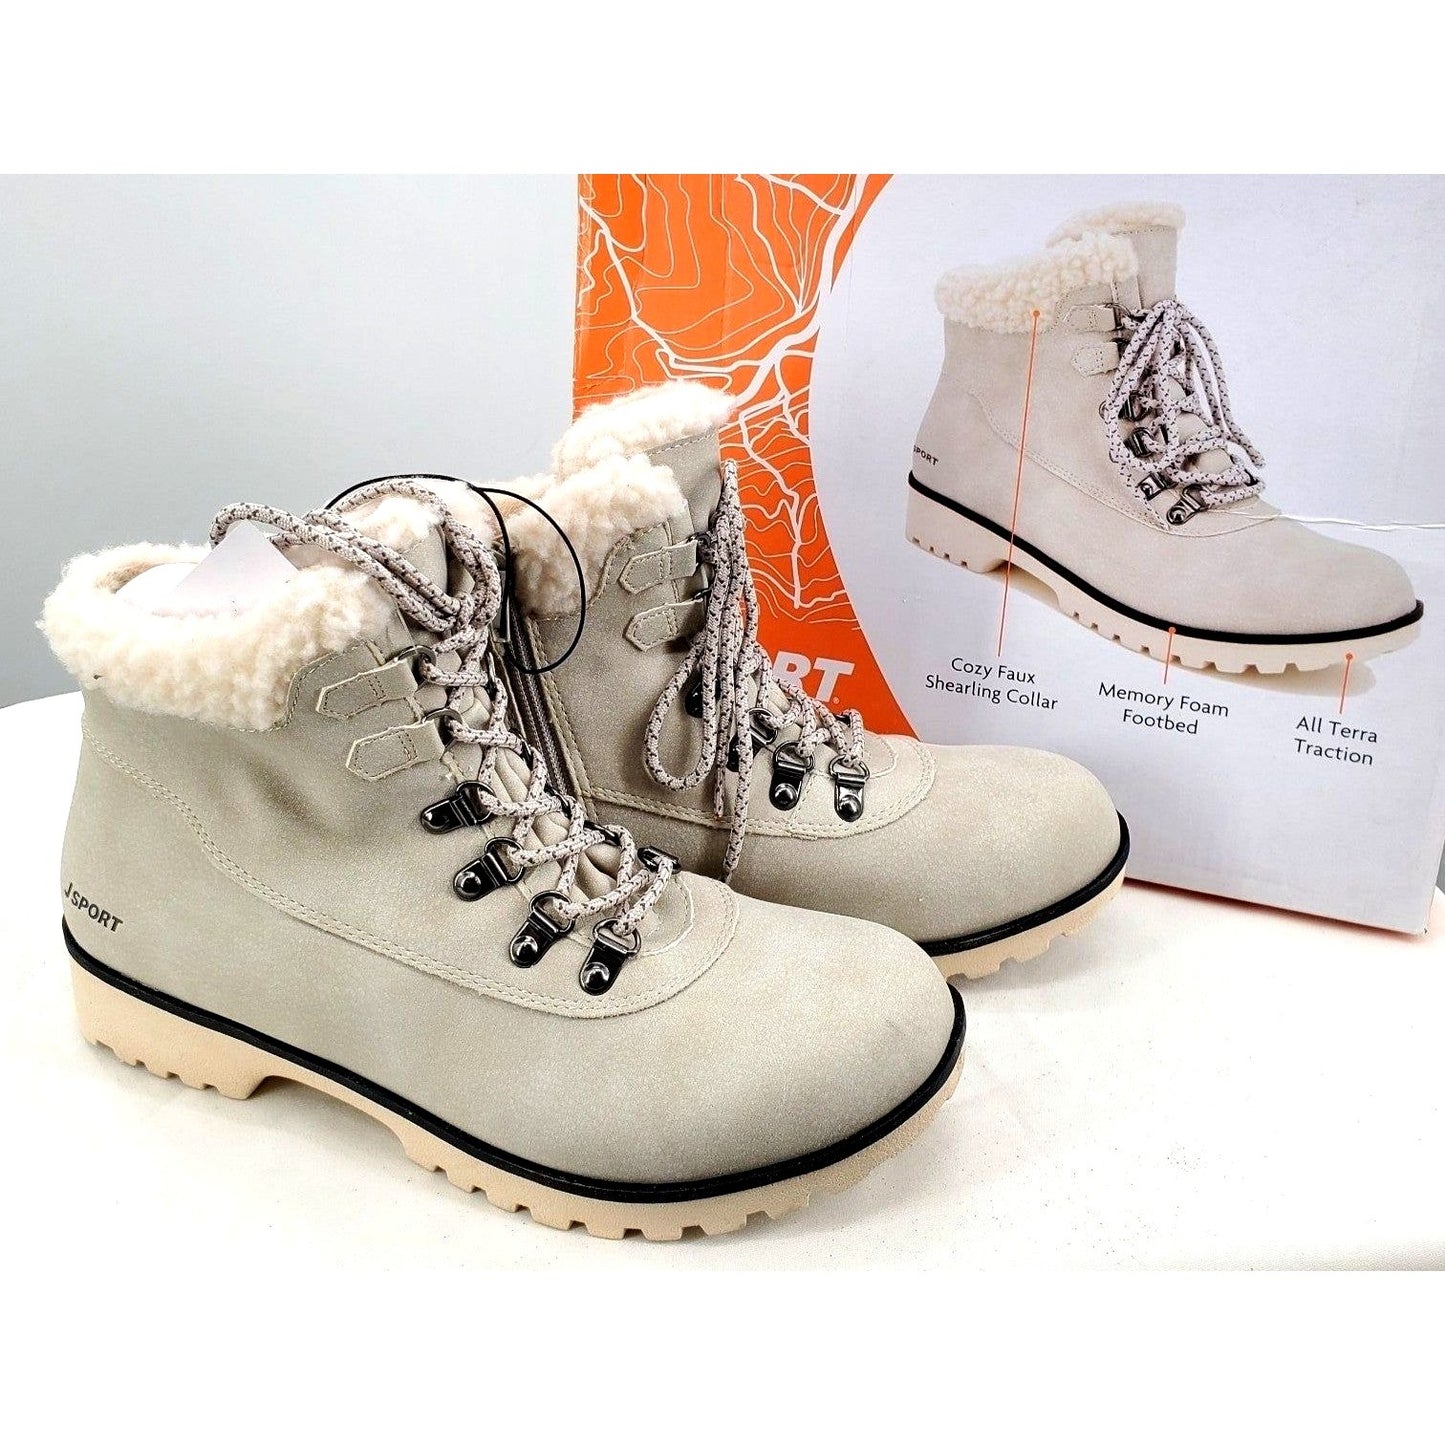 JSPORT Boots Woman's Faux Fur Shearling Hiking Outdoor Weather Ready shoes